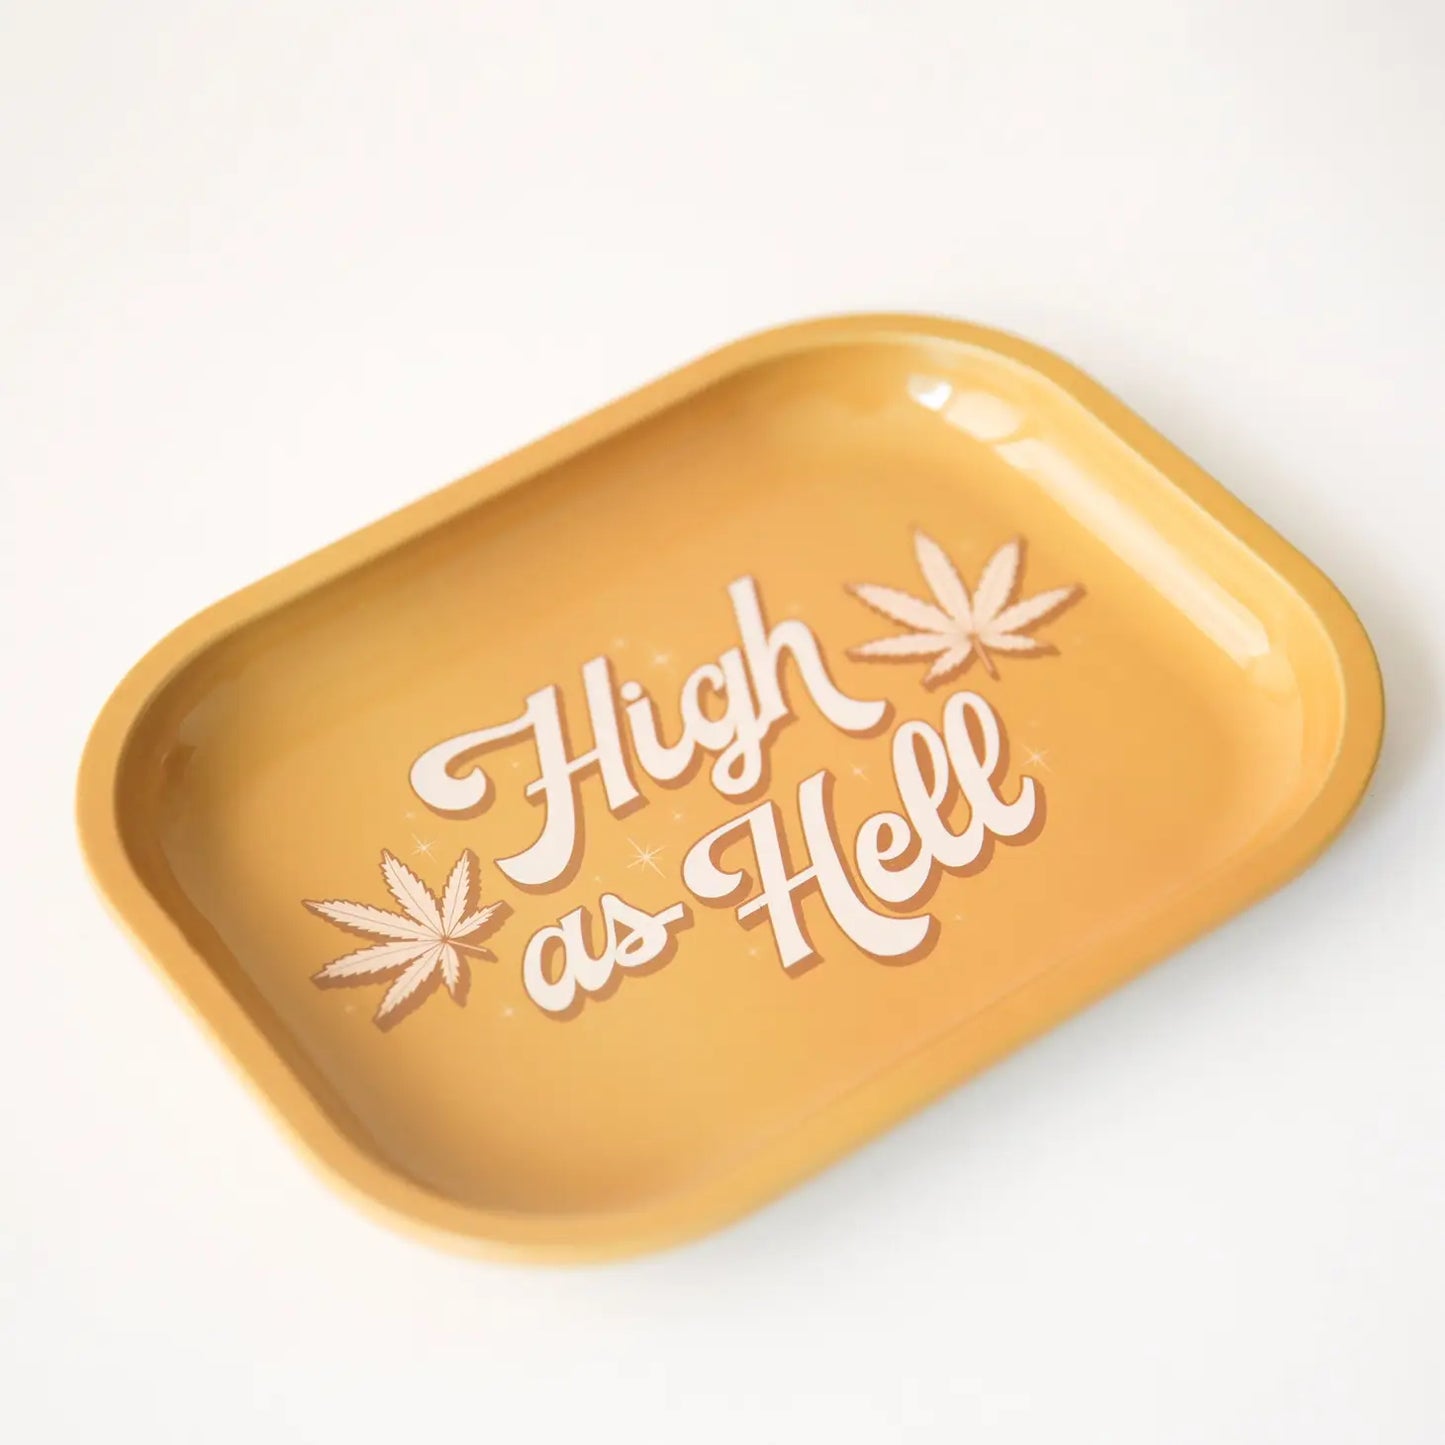 HIGH AS HELL METAL ROLLING TRAYS